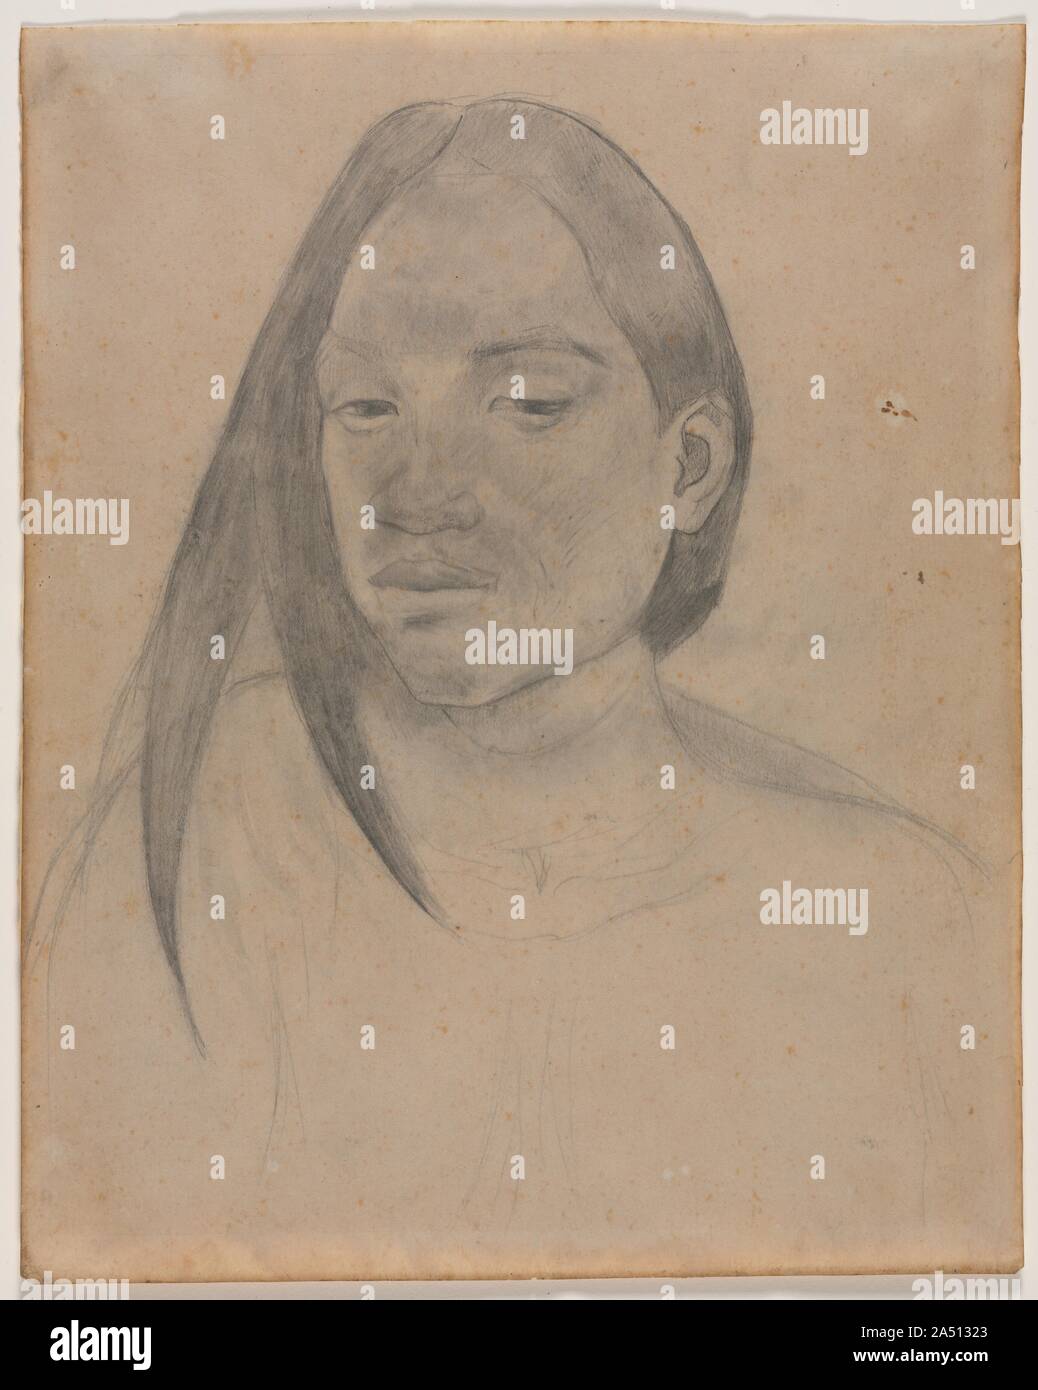 Head of a Tahitian Woman, 1891. This drawing belongs to a group of highly finished portrait drawings of Tahitians made by Gauguin shortly after his arrival in the South Seas. When acclimating to a new place, Gauguin initially delayed painting, preferring first to familiarize himself with the landscape and people through observation and drawing. The meticulous quality of this graphite study suggests that it was made from life. The woman&#x2019;s noble face and enigmatic expression allude to the spirituality and melancholy that Gauguin sought to conjure in his Polynesian work. Stock Photo